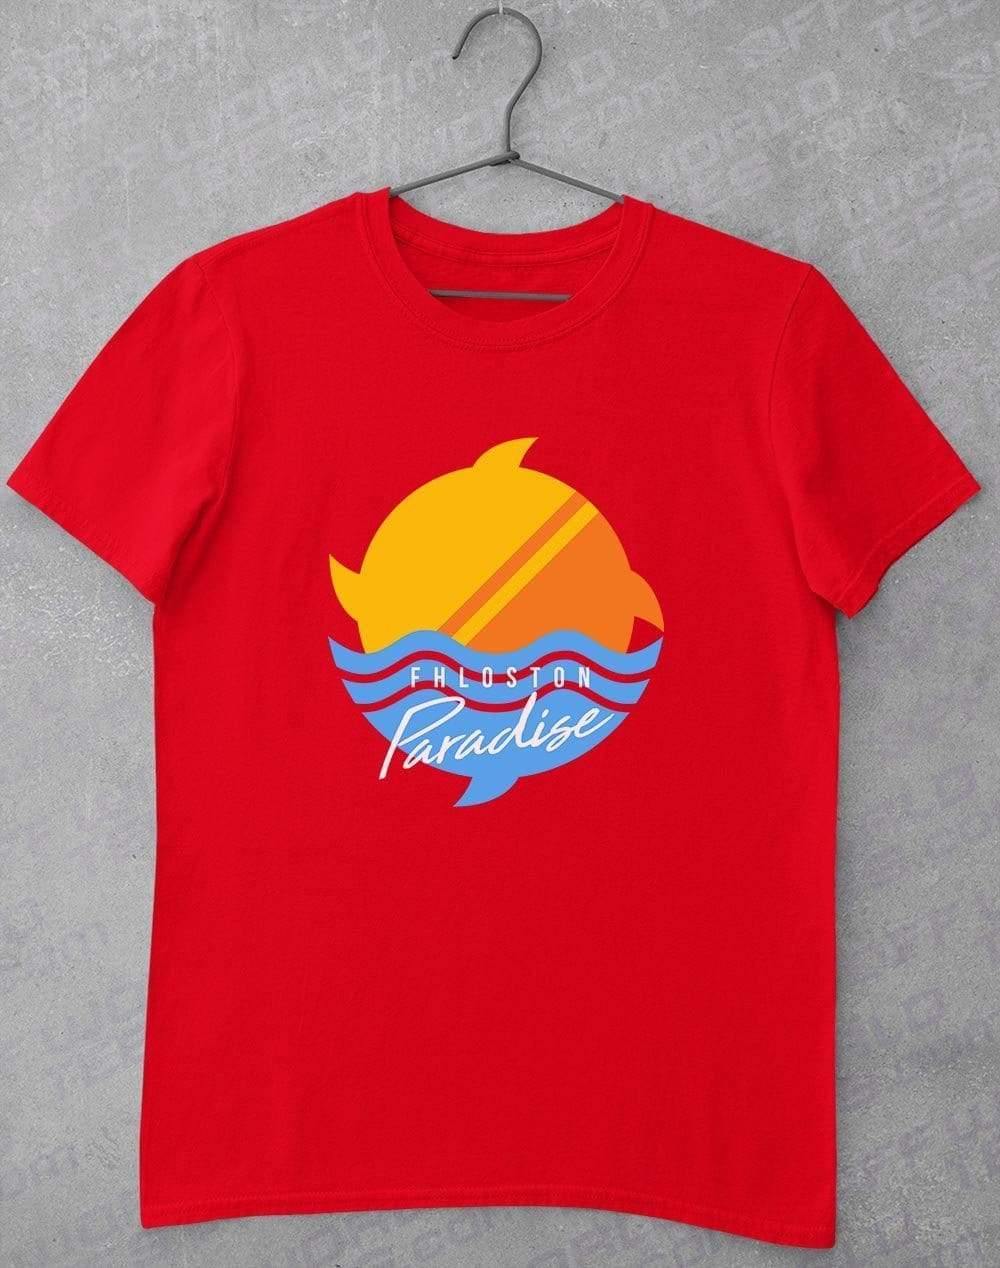 Fhloston Paradise Classic Logo T-Shirt S / Red  - Off World Tees